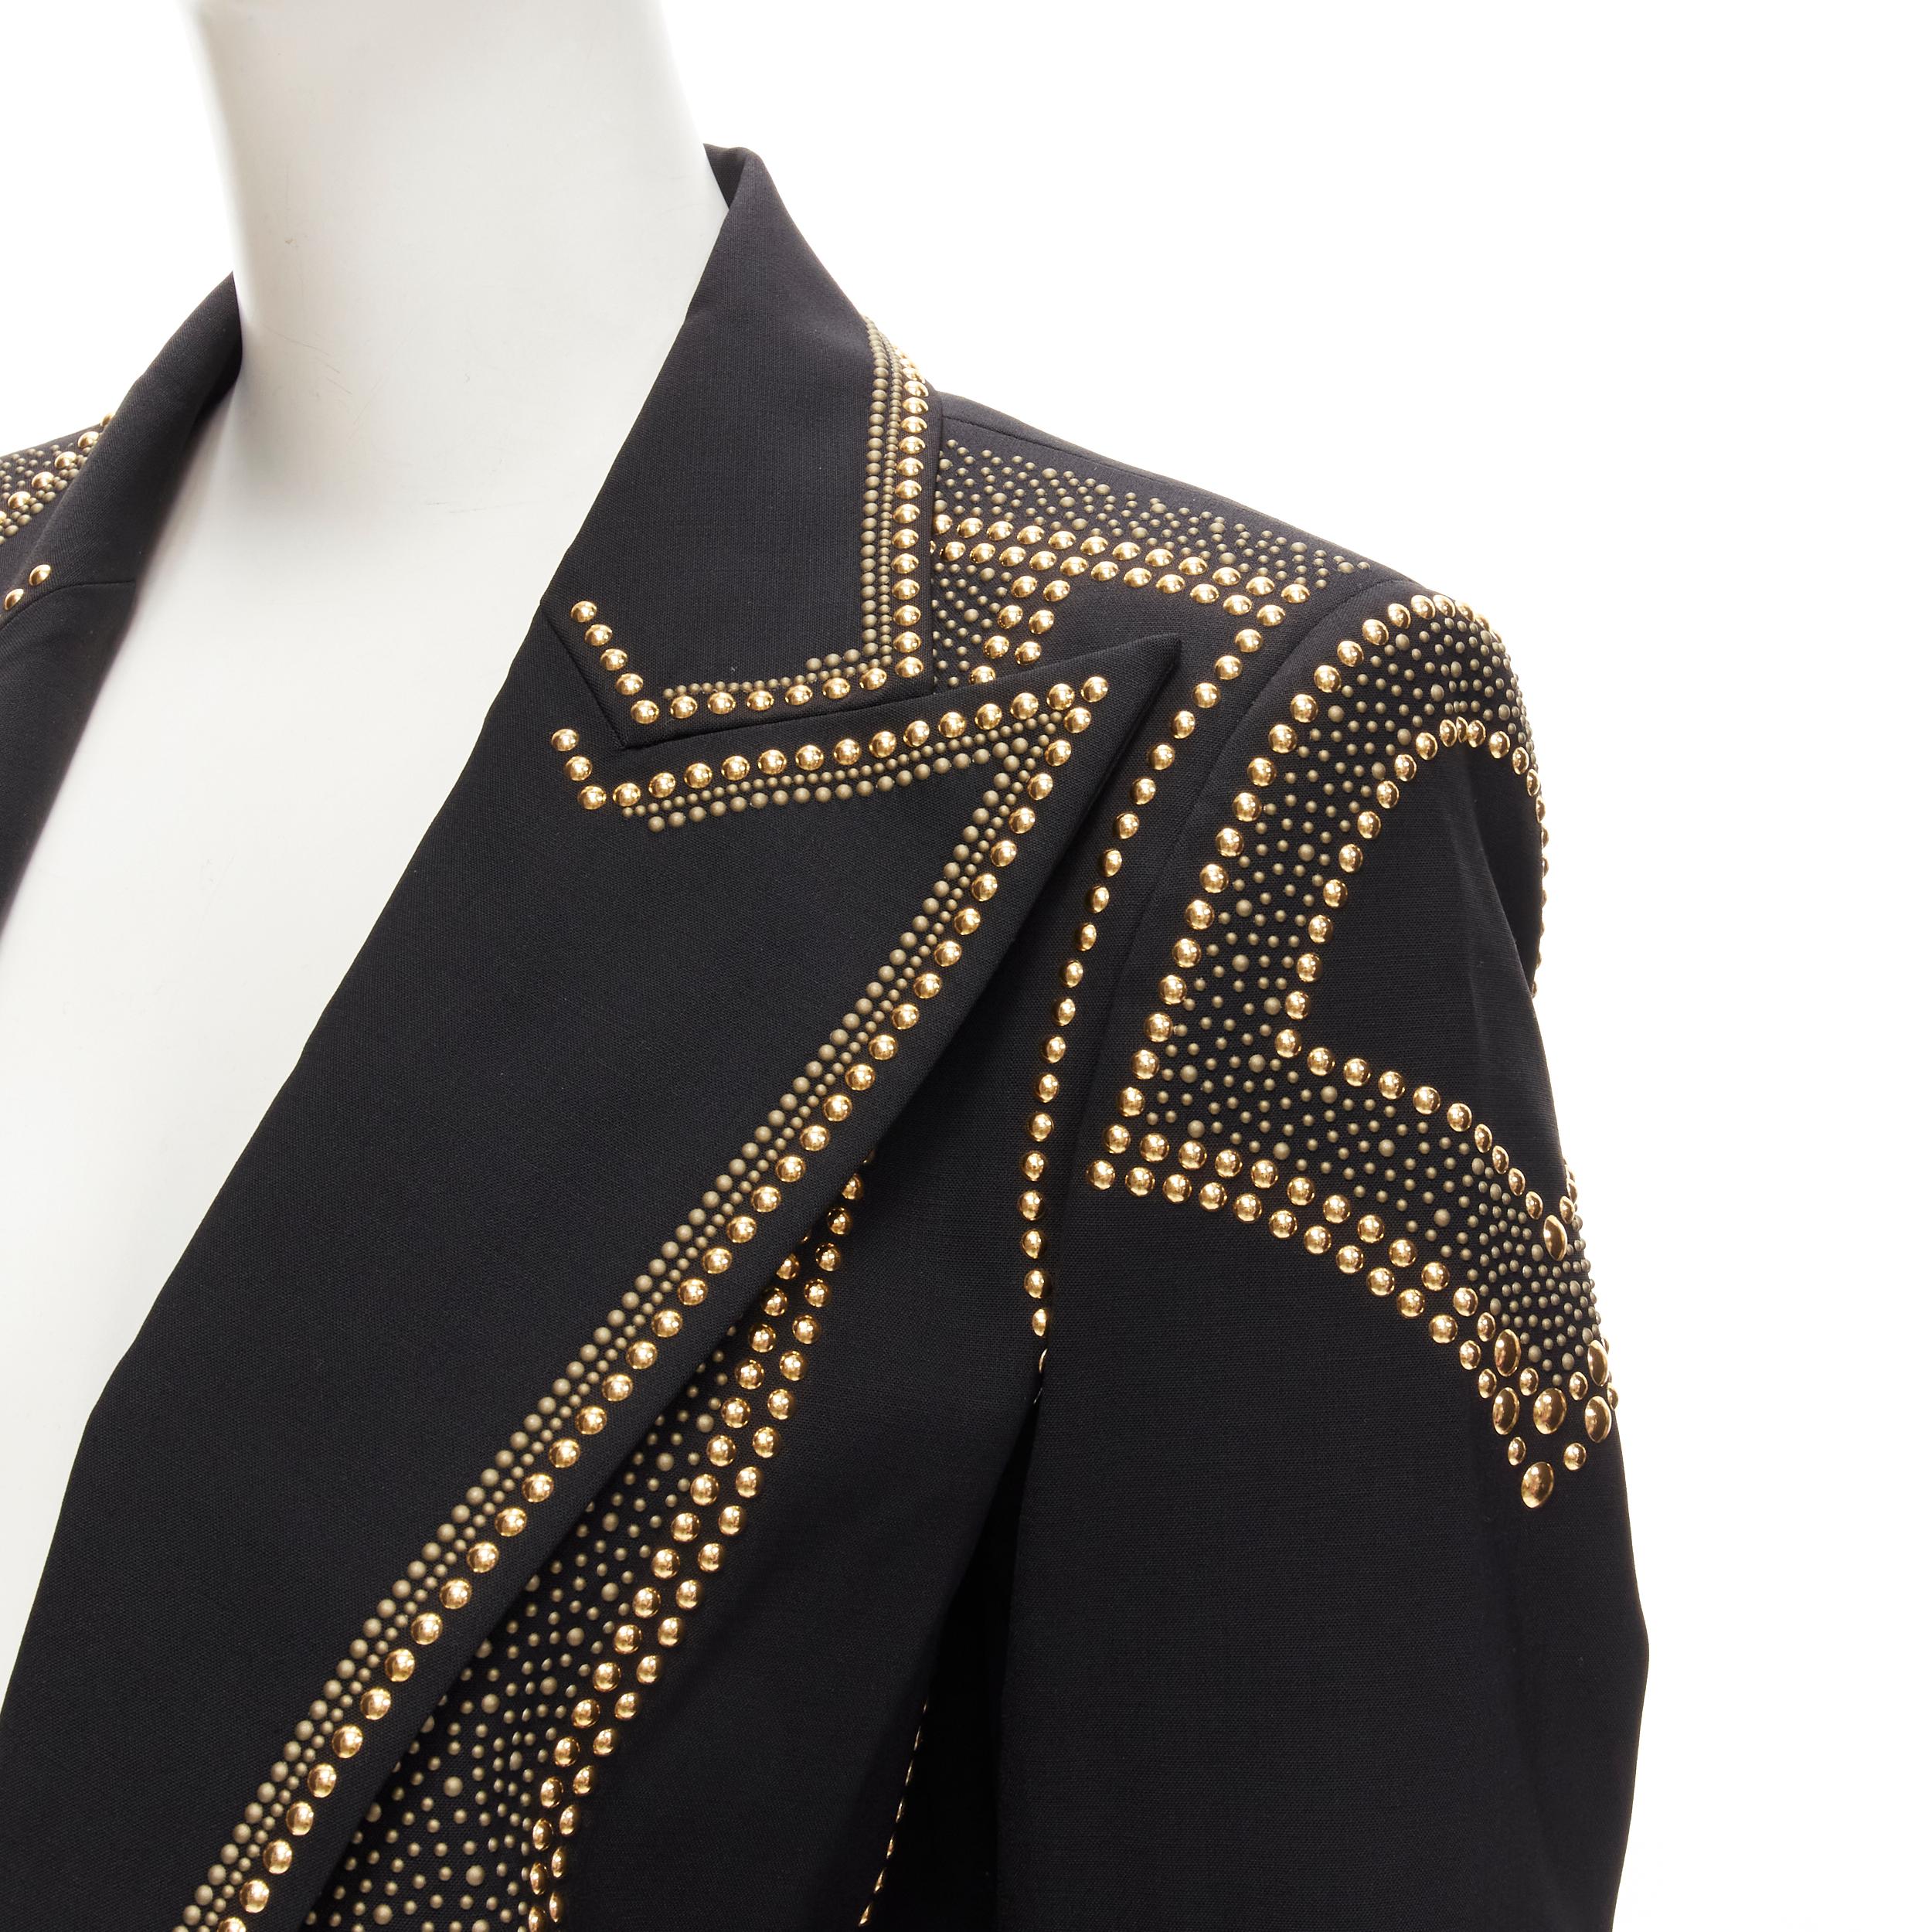 new BALMAIN black micro gold stud embellished peak lapel cropped blazer 16A XS
Brand: Balmain
Material: Feels like wool
Color: Black
Pattern: Solid
Extra Detail: Fully stud embellishment. Padded shoulder. Peak lapel. Gold-tone buttons at